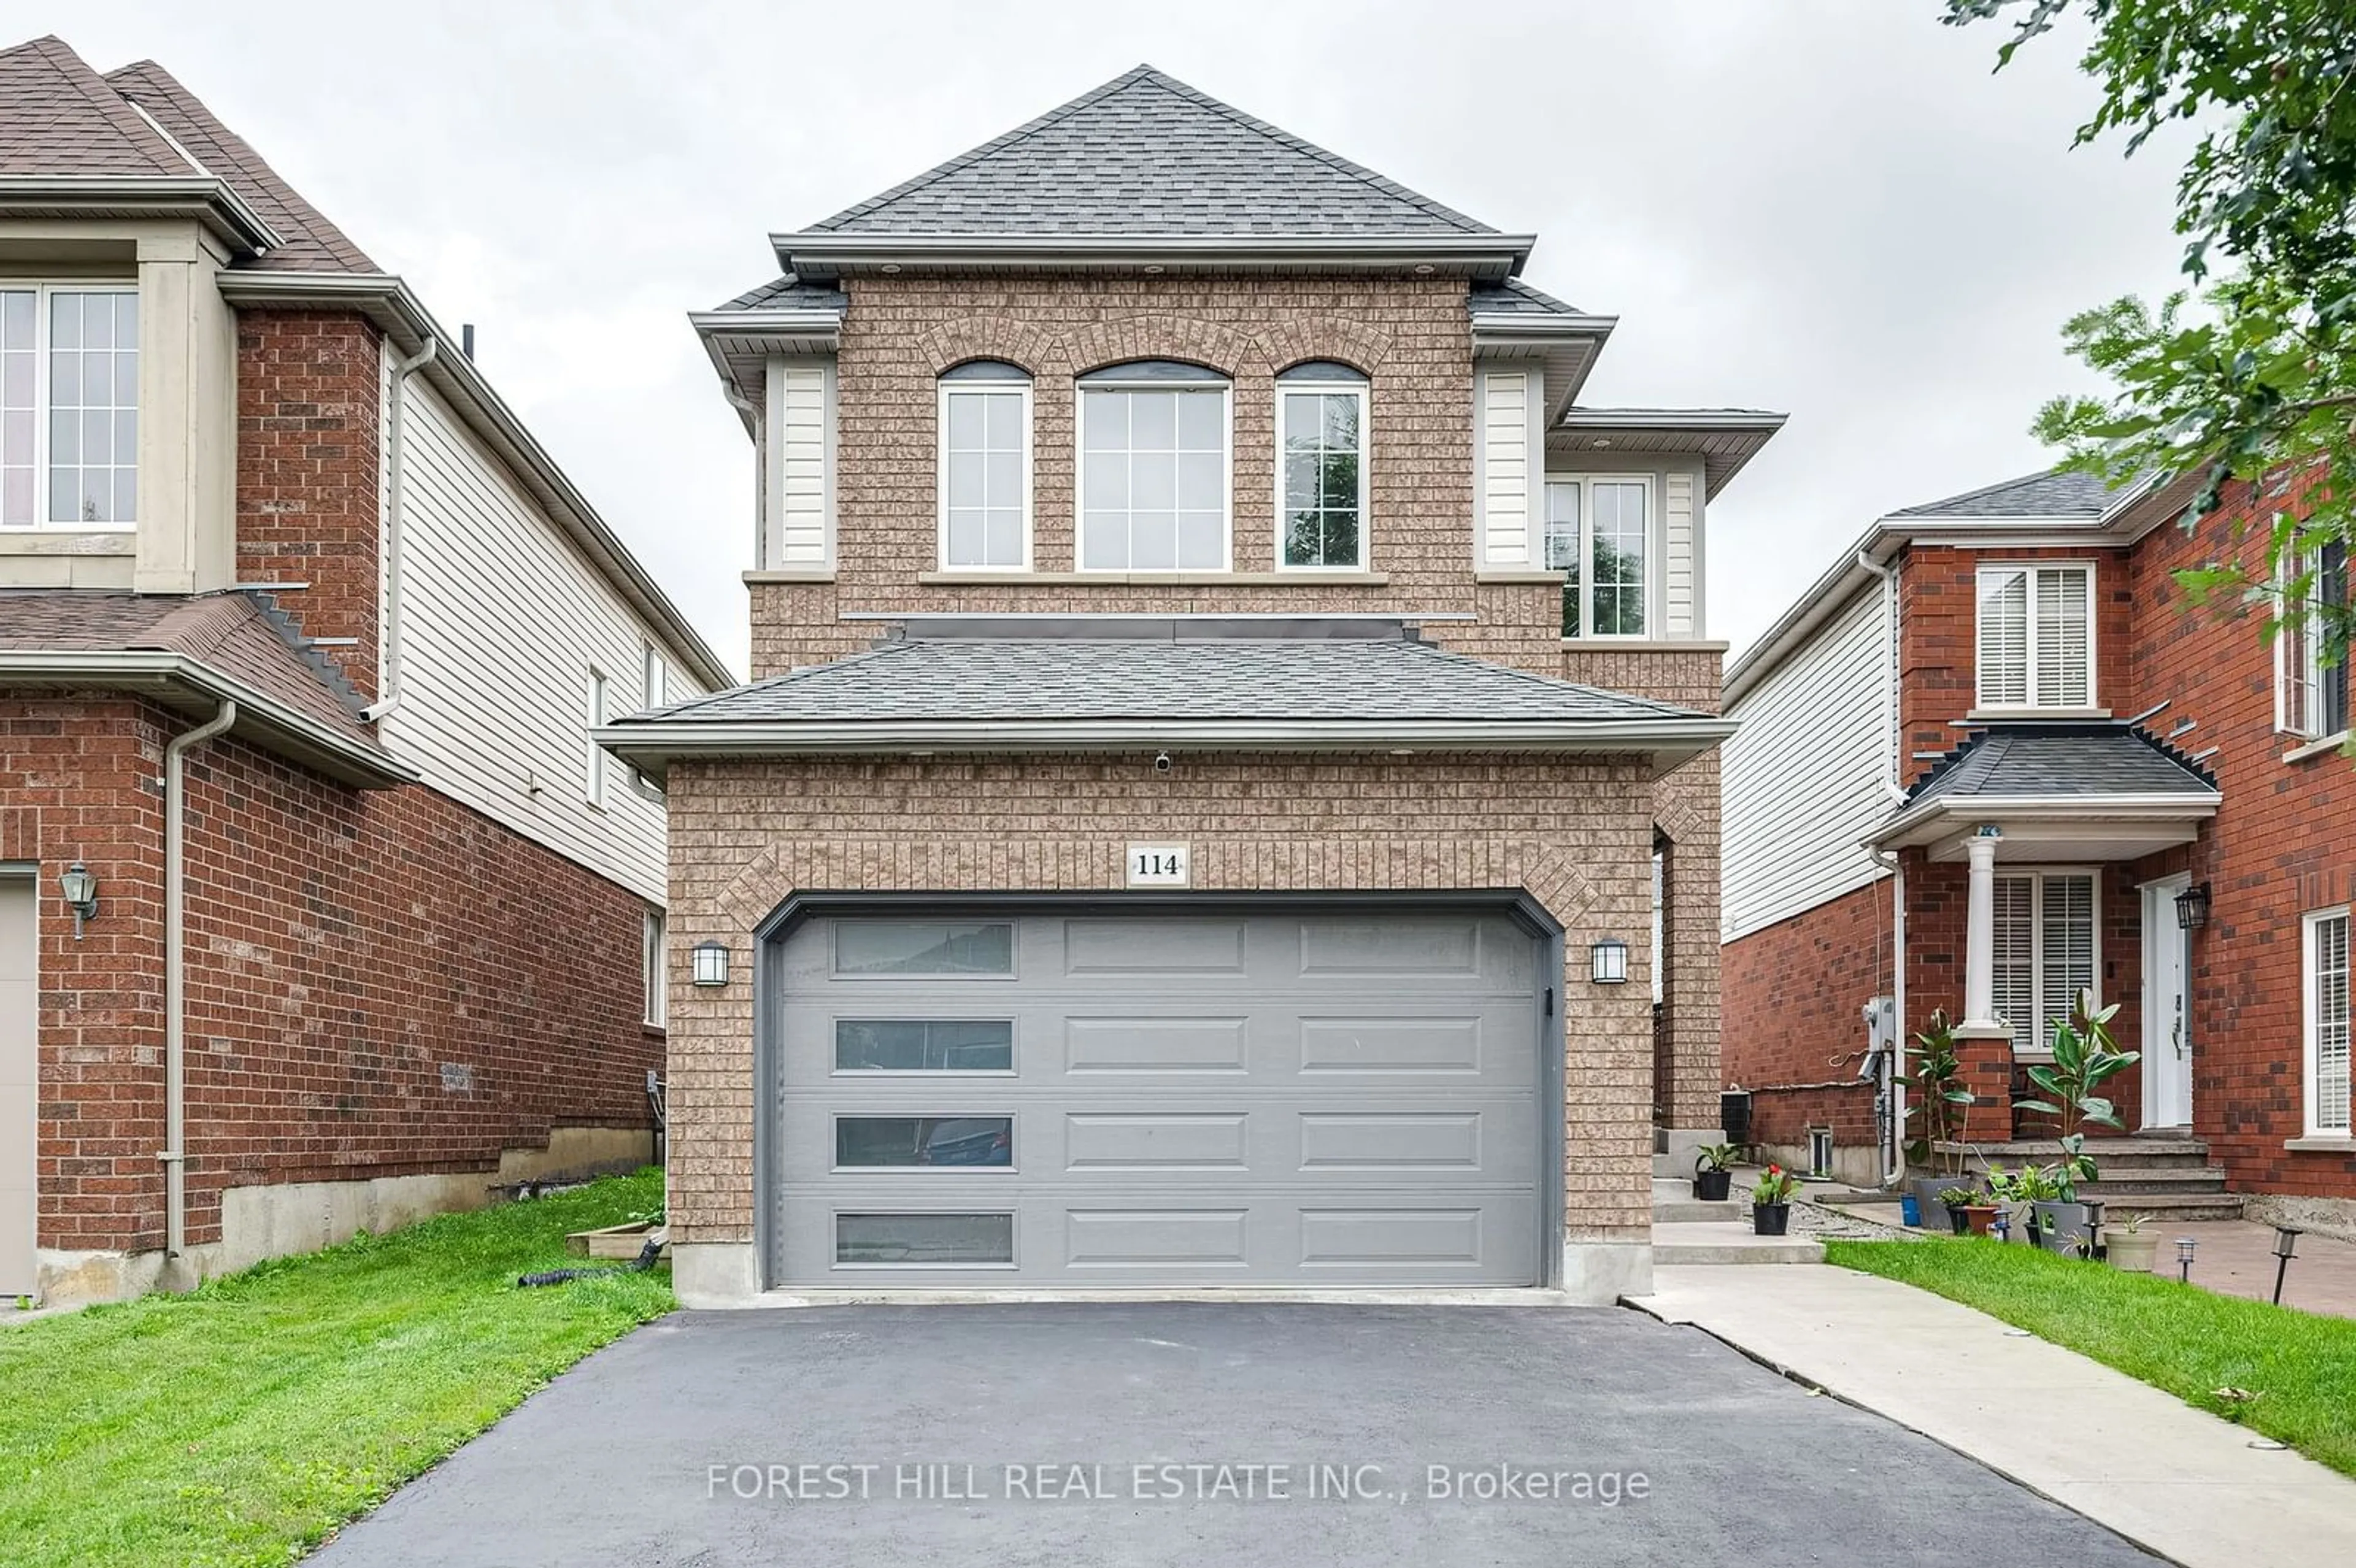 Home with brick exterior material for 114 Black Forest Dr, Brampton Ontario L6R 2M8